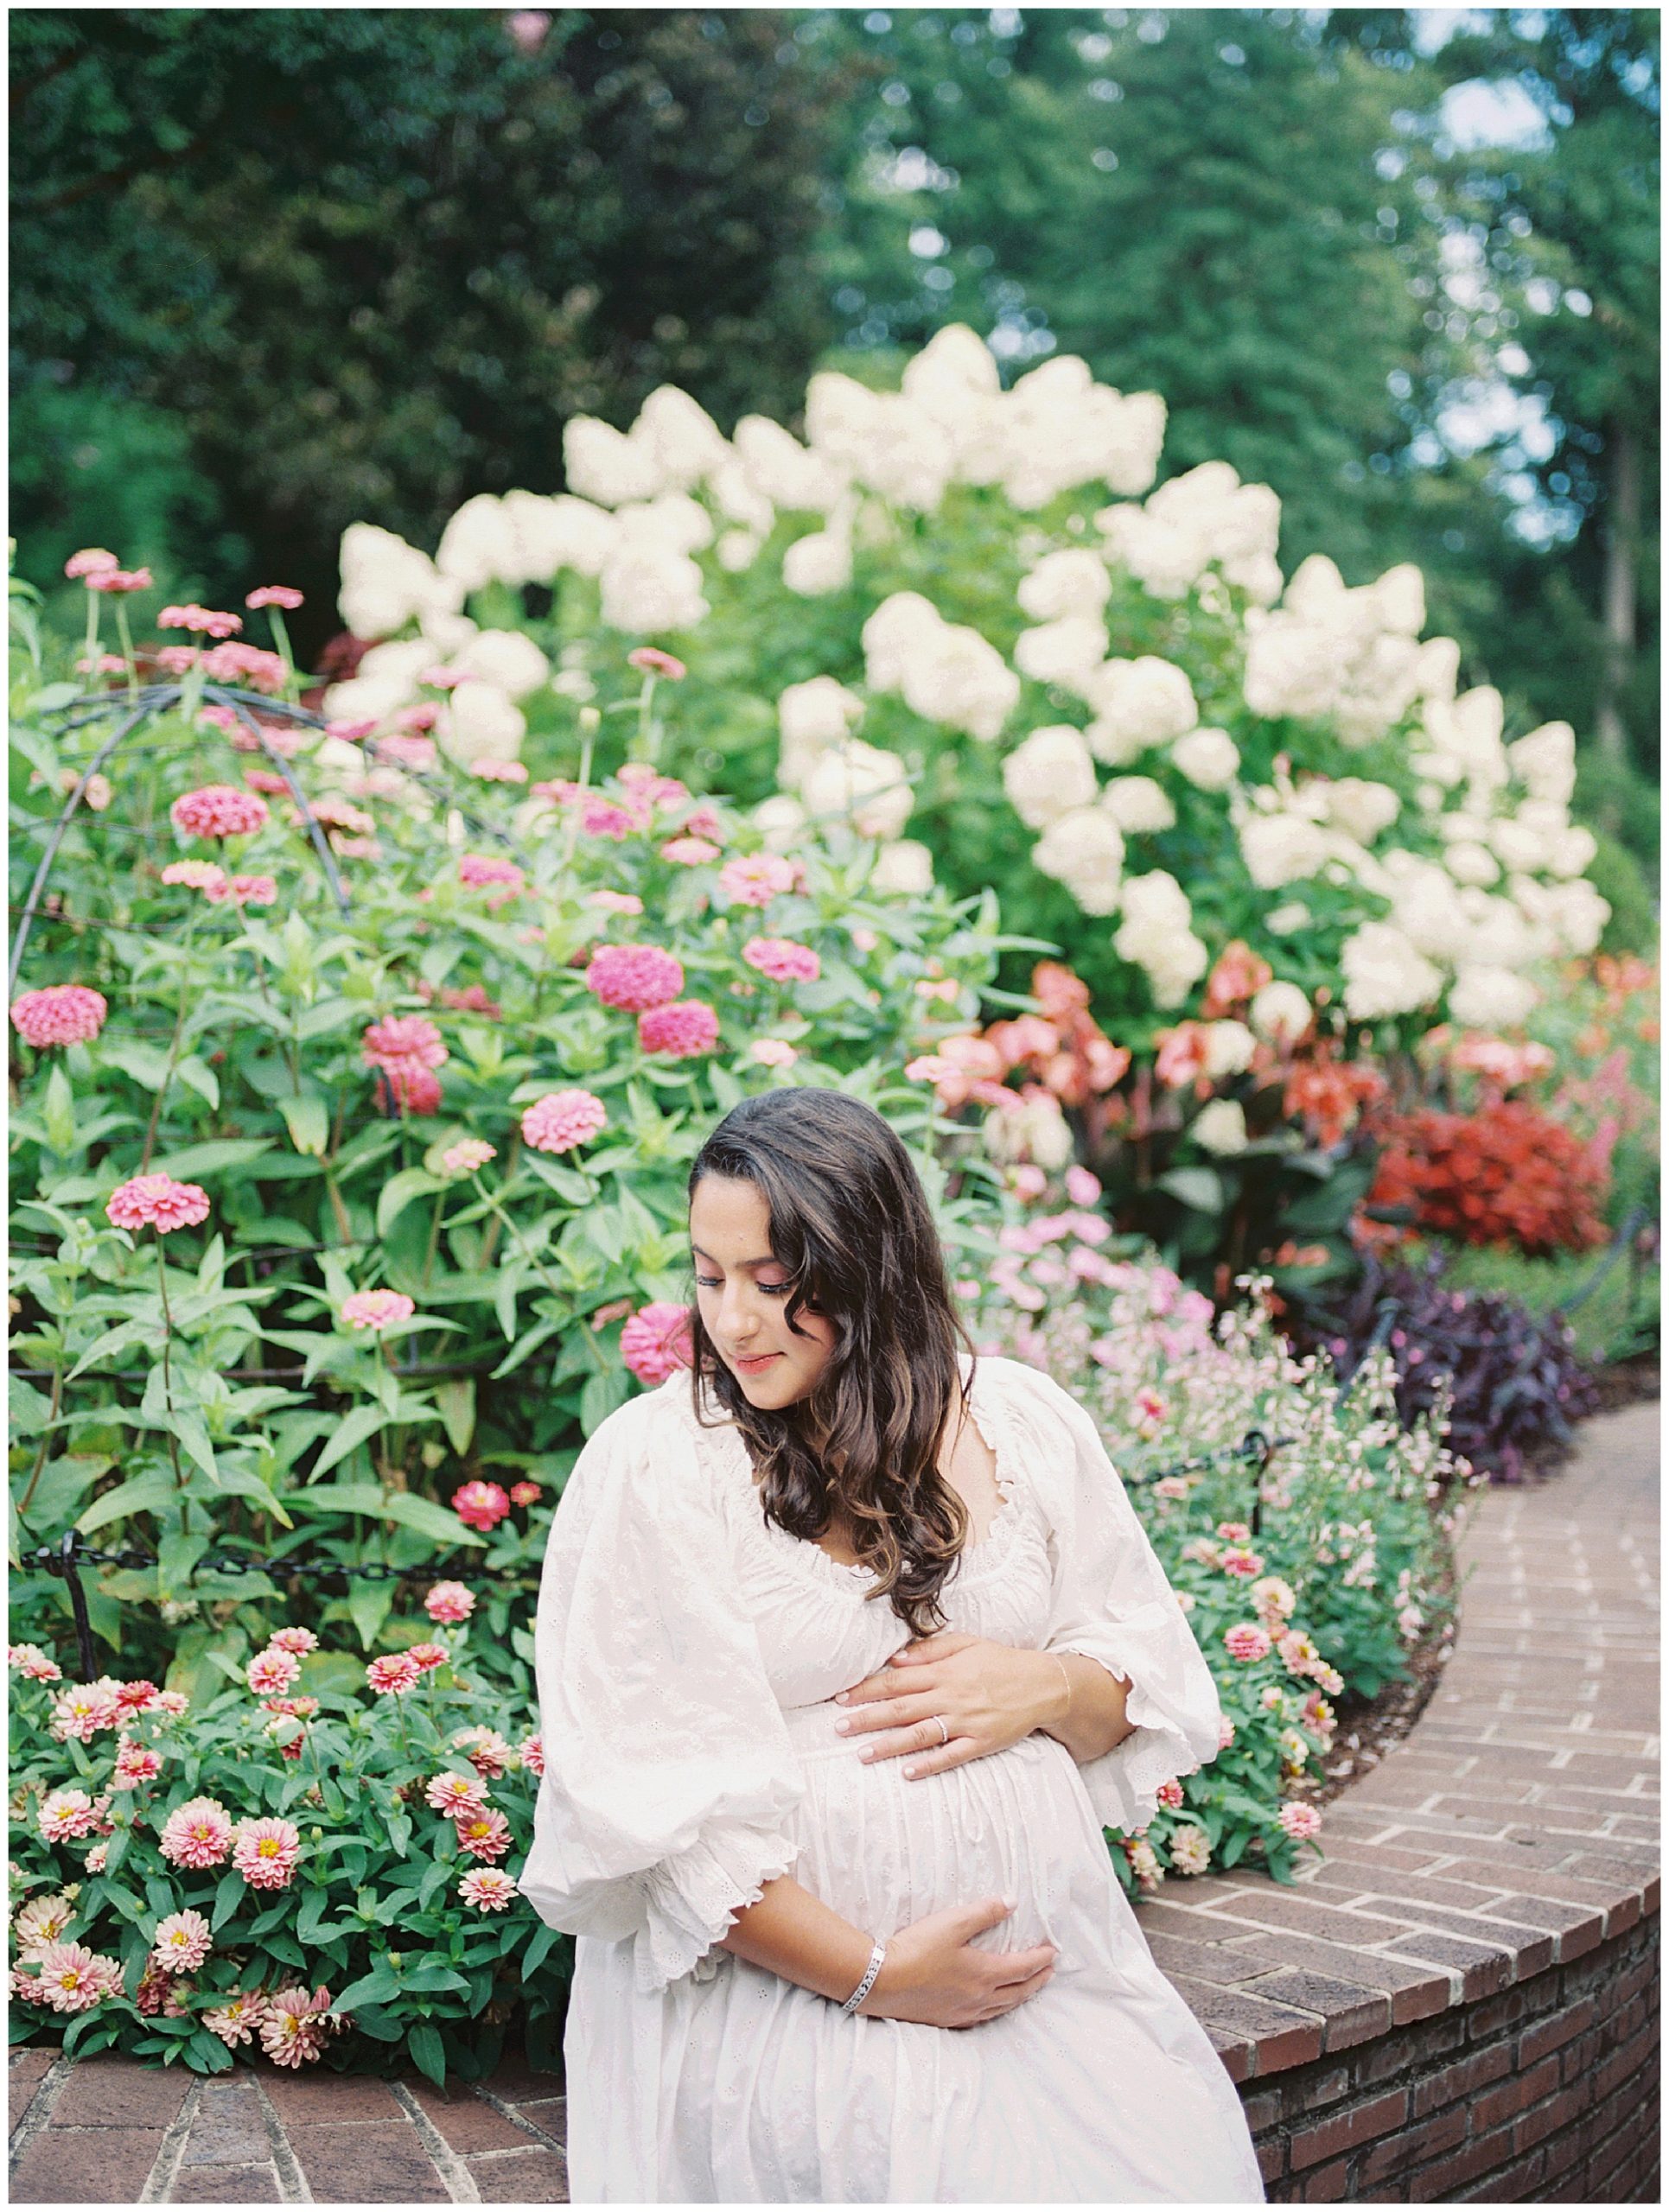 Pregnant mother sits on brick arch in front of pink and purple flowers during floral maternity session.